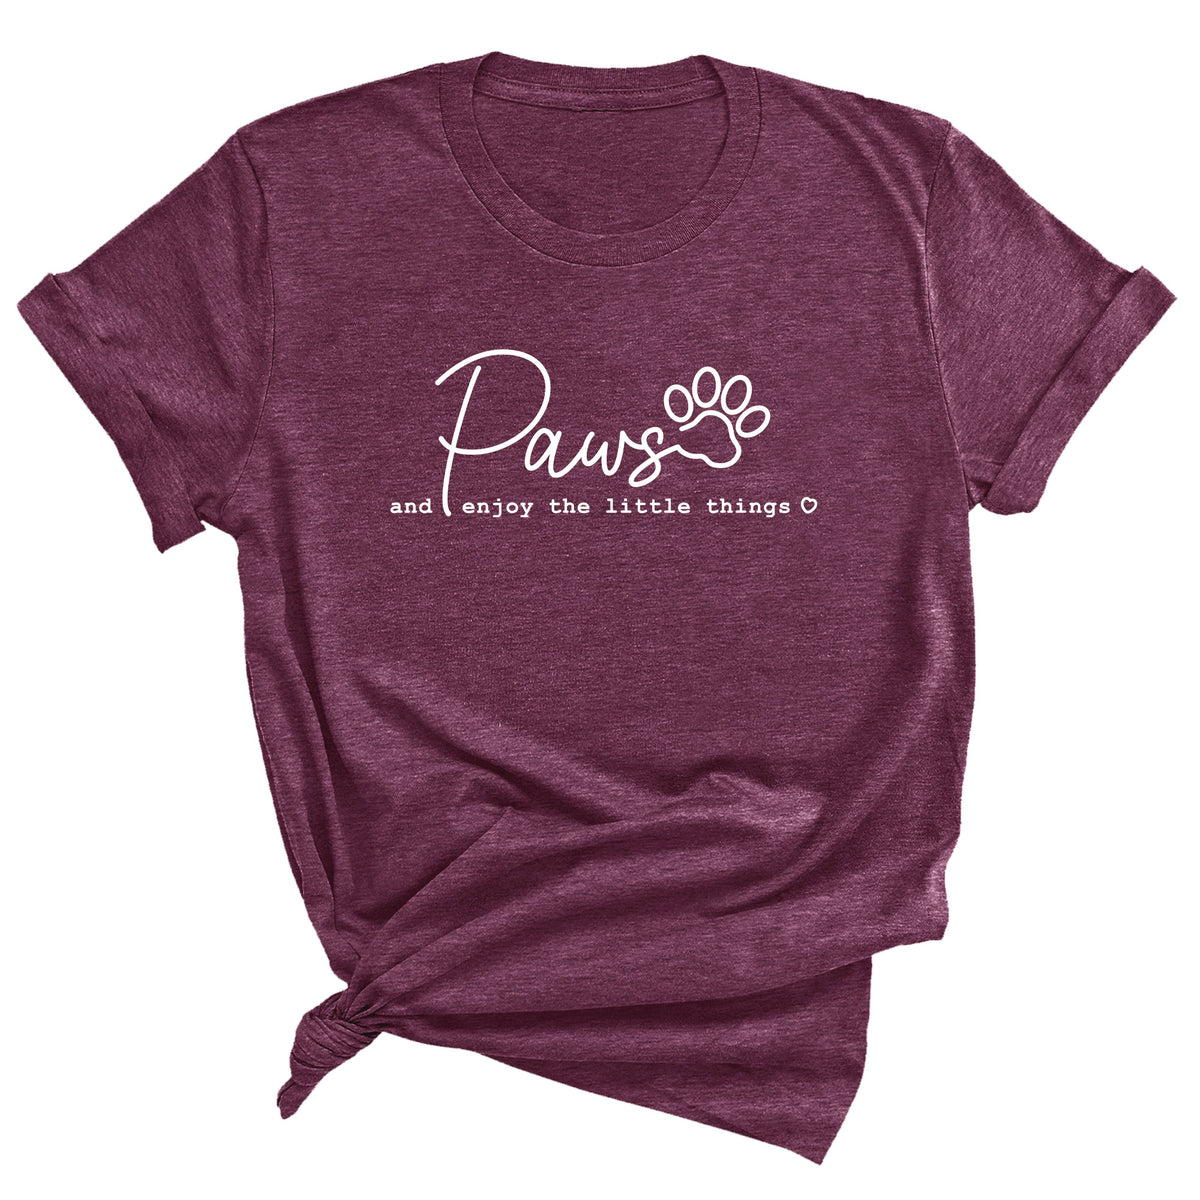 Paws and Enjoy the Little Things Unisex T-Shirt